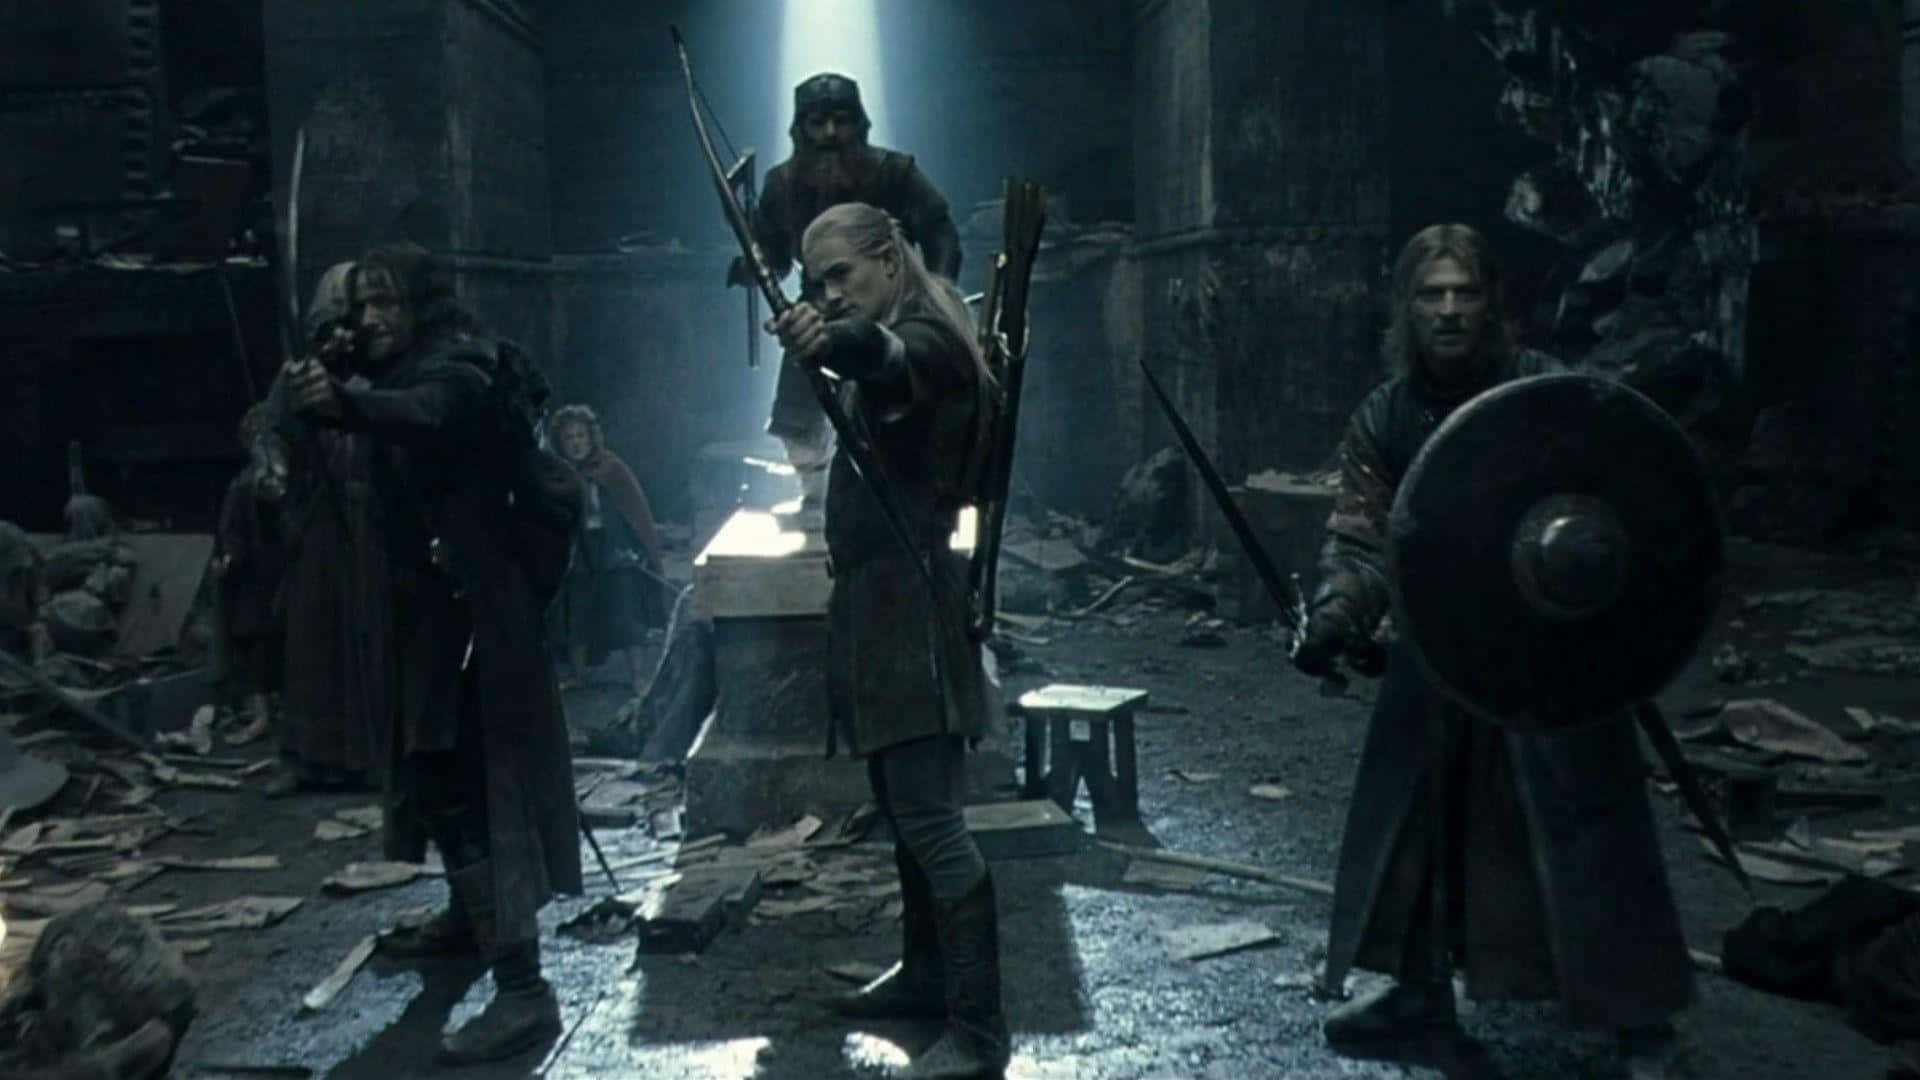 Unite The Fellowship to Destroy The Ring